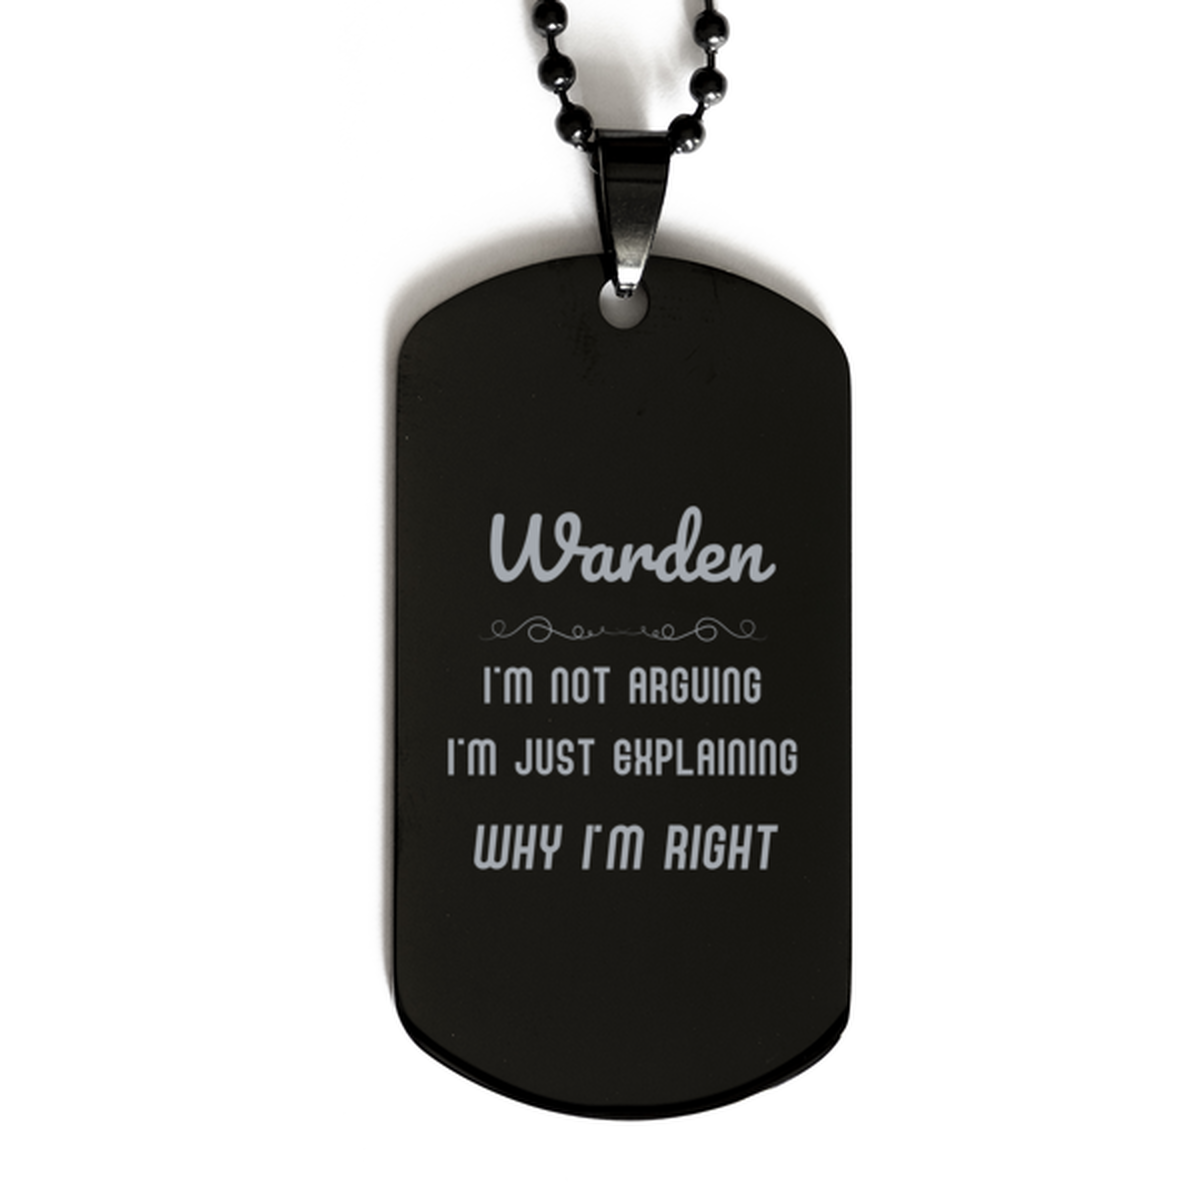 Warden I'm not Arguing. I'm Just Explaining Why I'm RIGHT Black Dog Tag, Funny Saying Quote Warden Gifts For Warden Graduation Birthday Christmas Gifts for Men Women Coworker